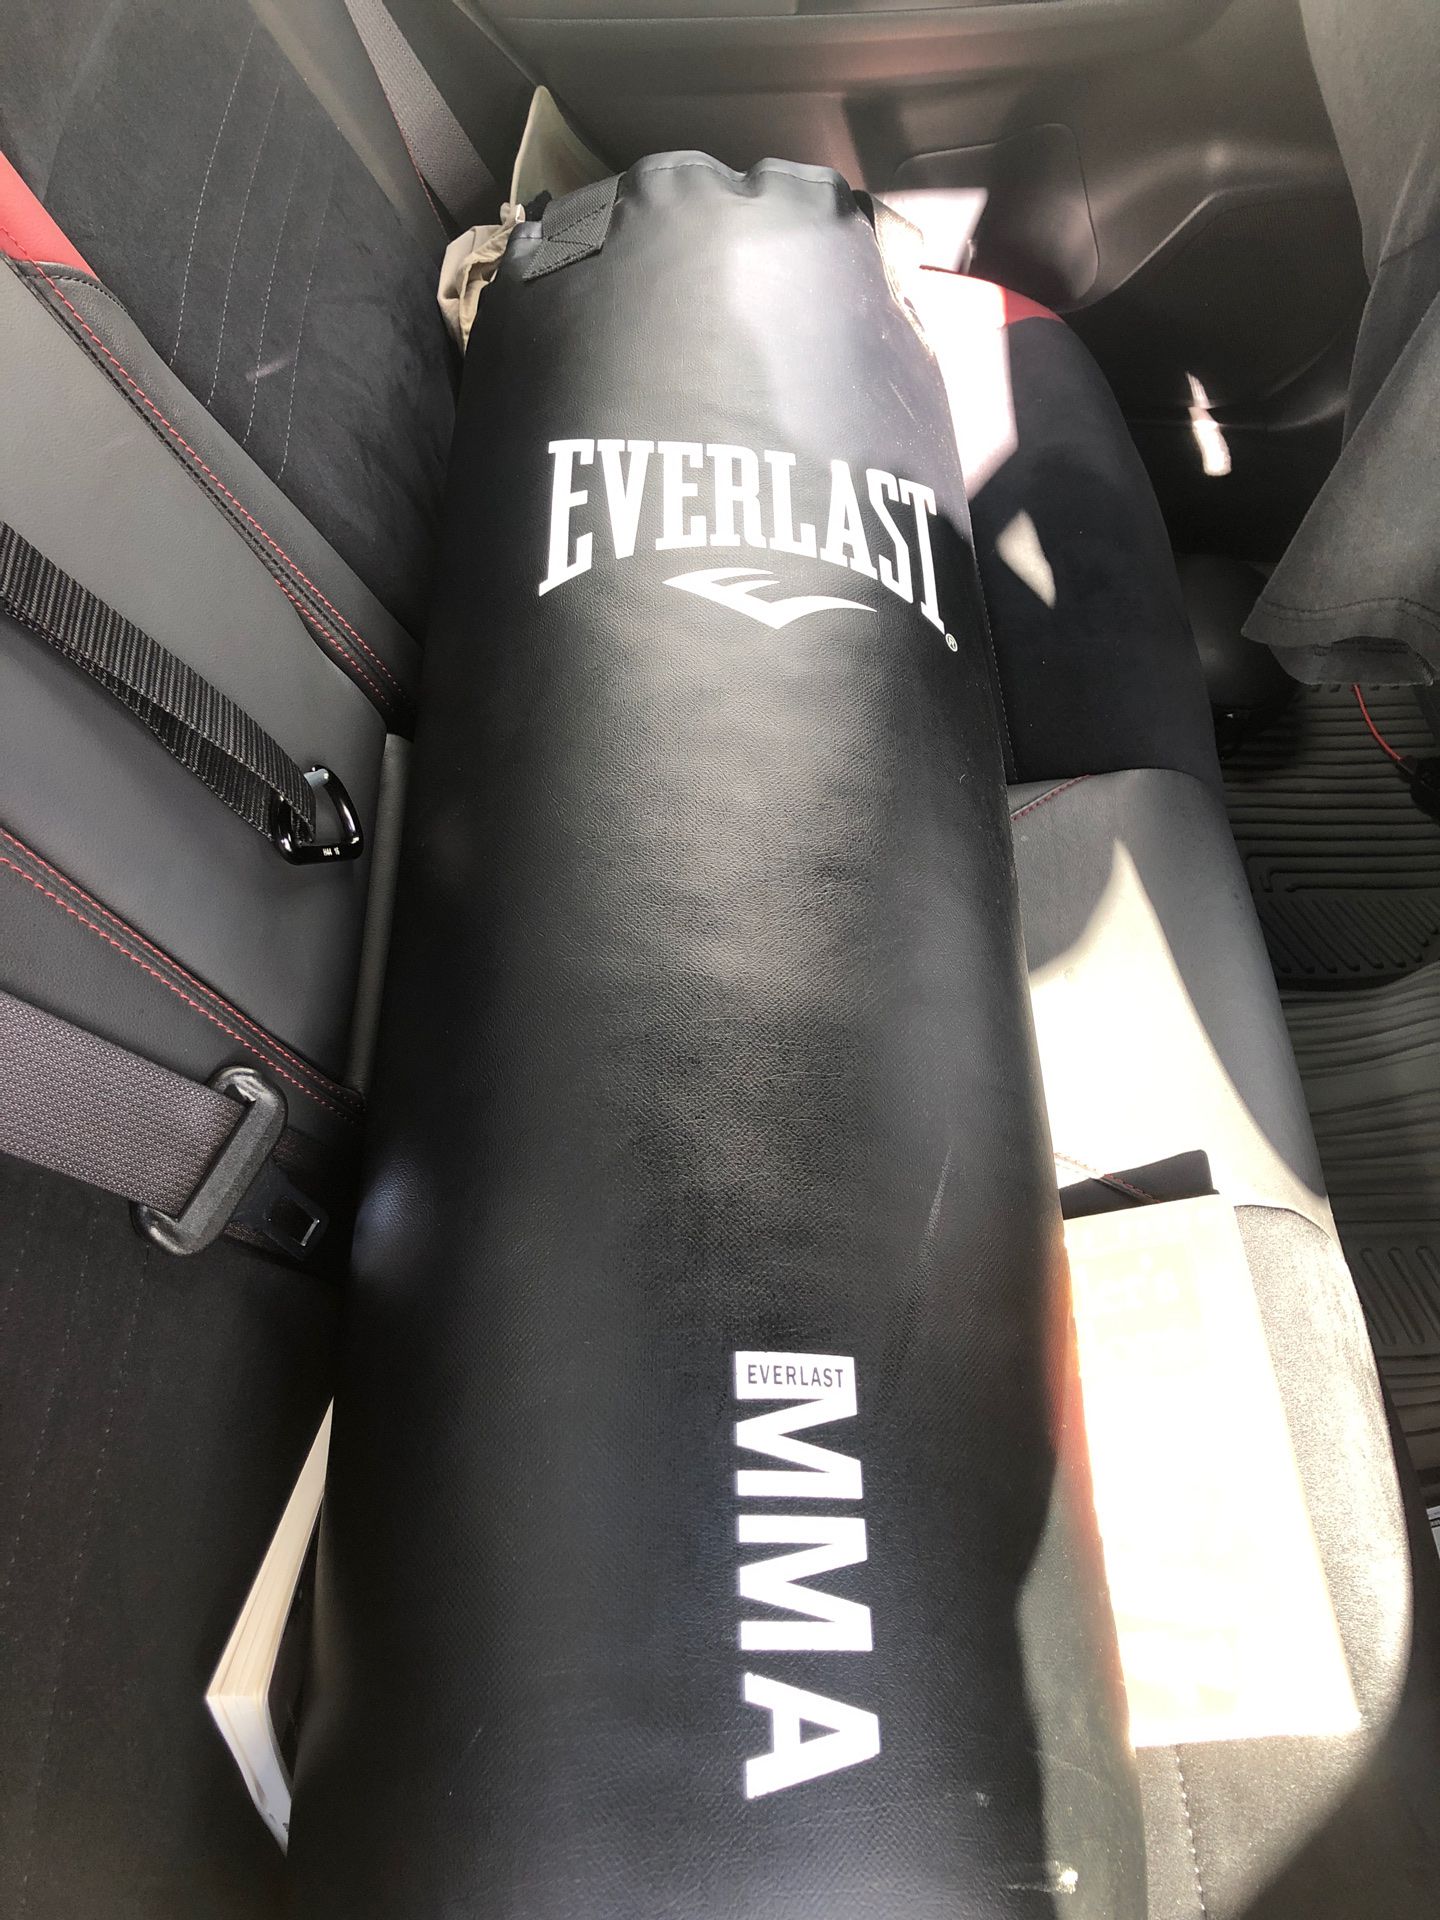 MMA punching bag And idk how much the weight is but I do know u have to hang it